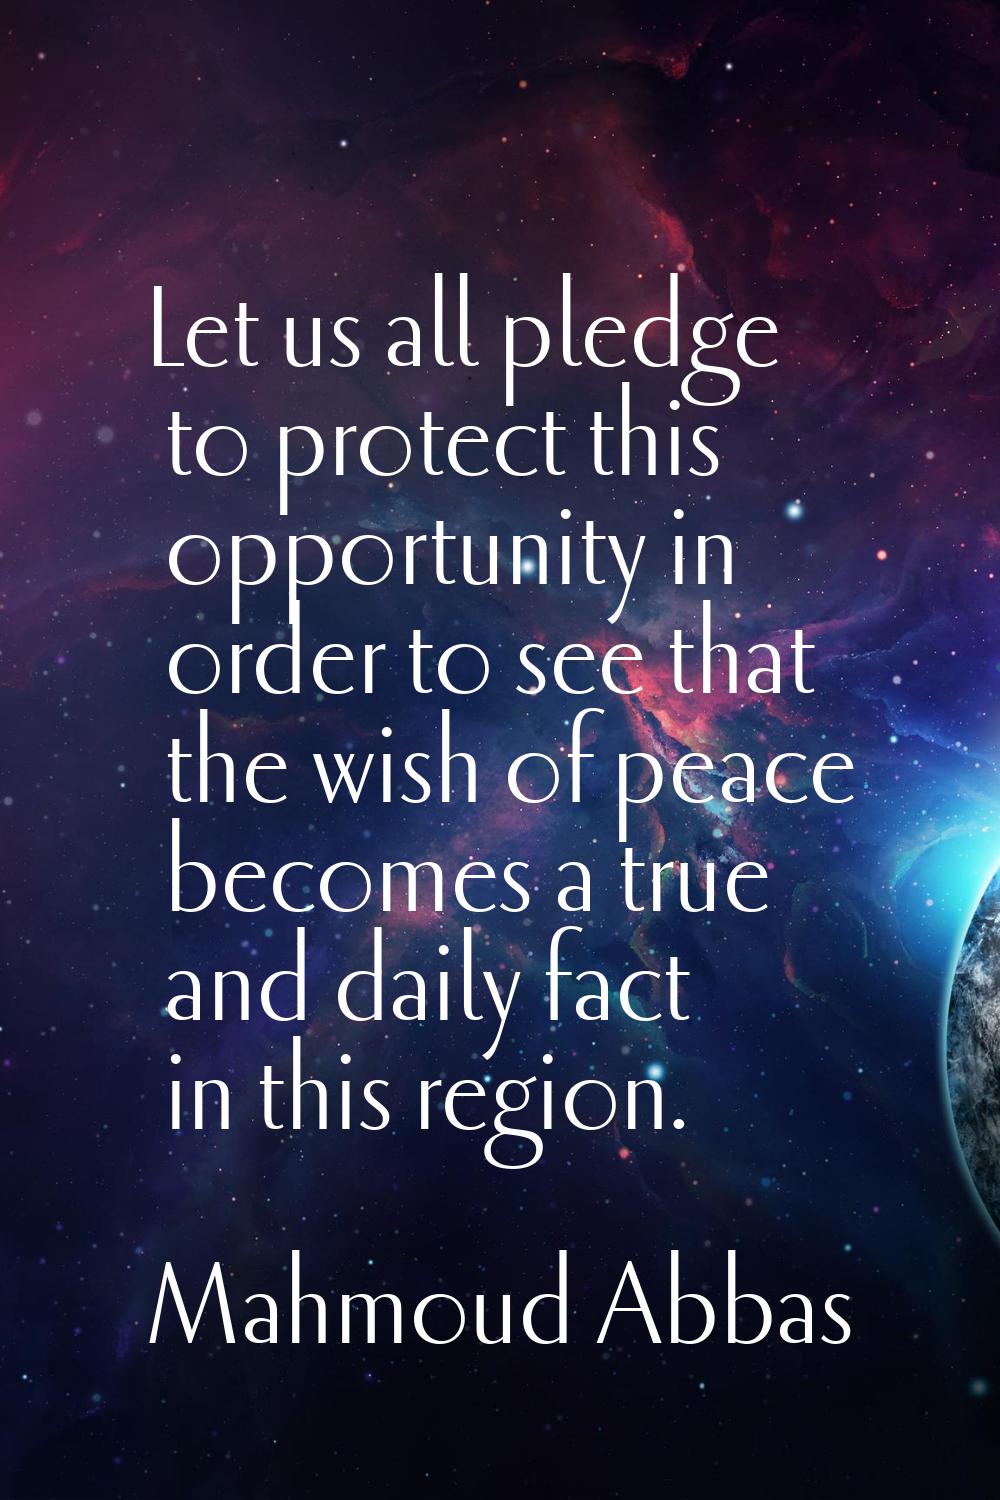 Let us all pledge to protect this opportunity in order to see that the wish of peace becomes a true